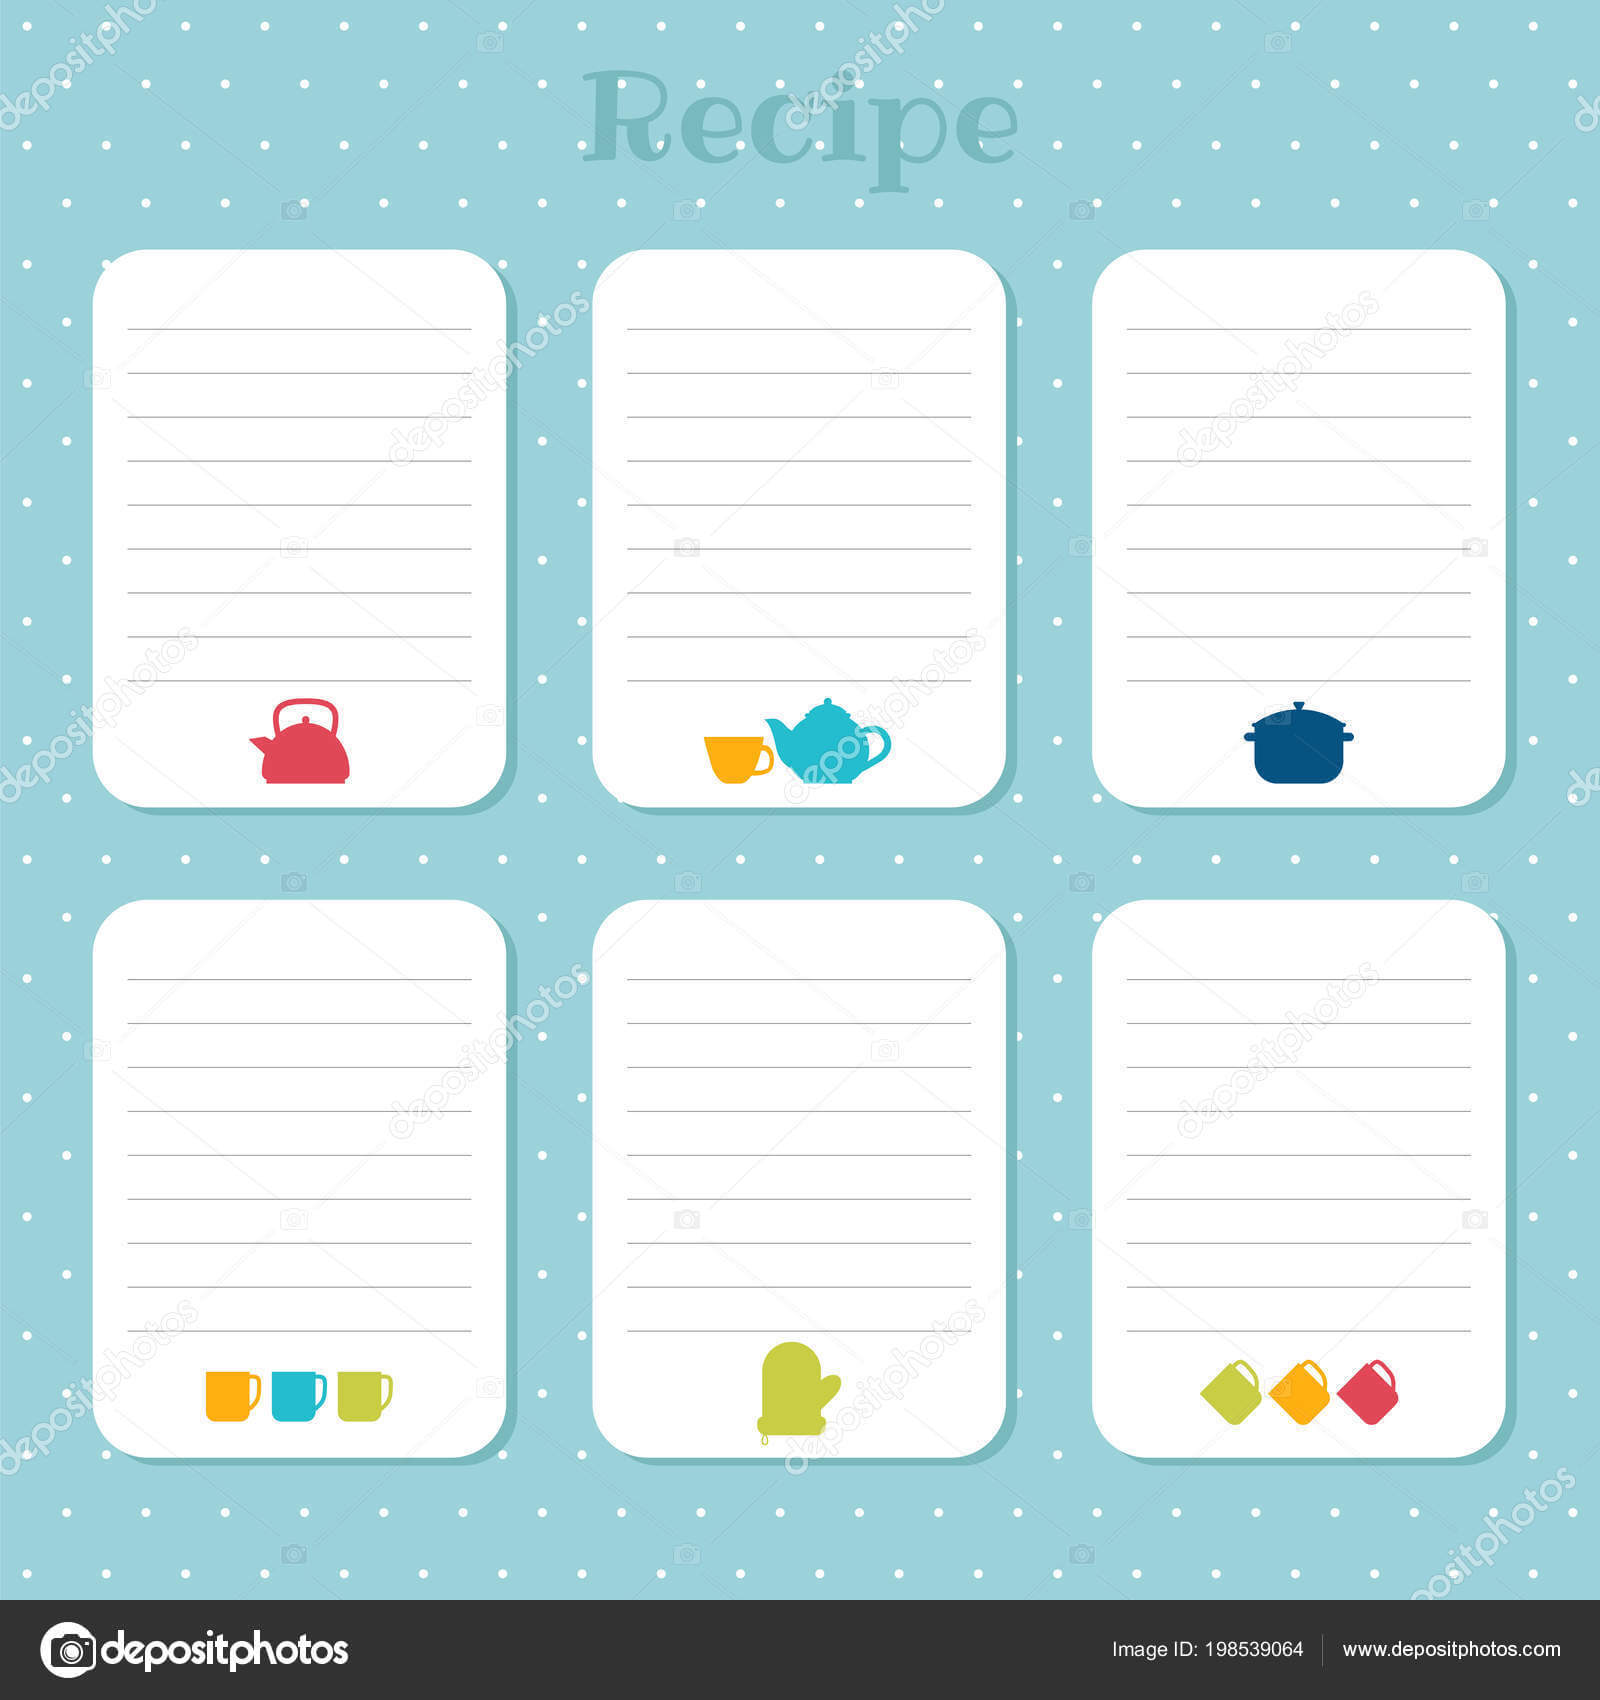 Recipe Card Templates | Recipe Cards Set Cooking Card Intended For Restaurant Recipe Card Template